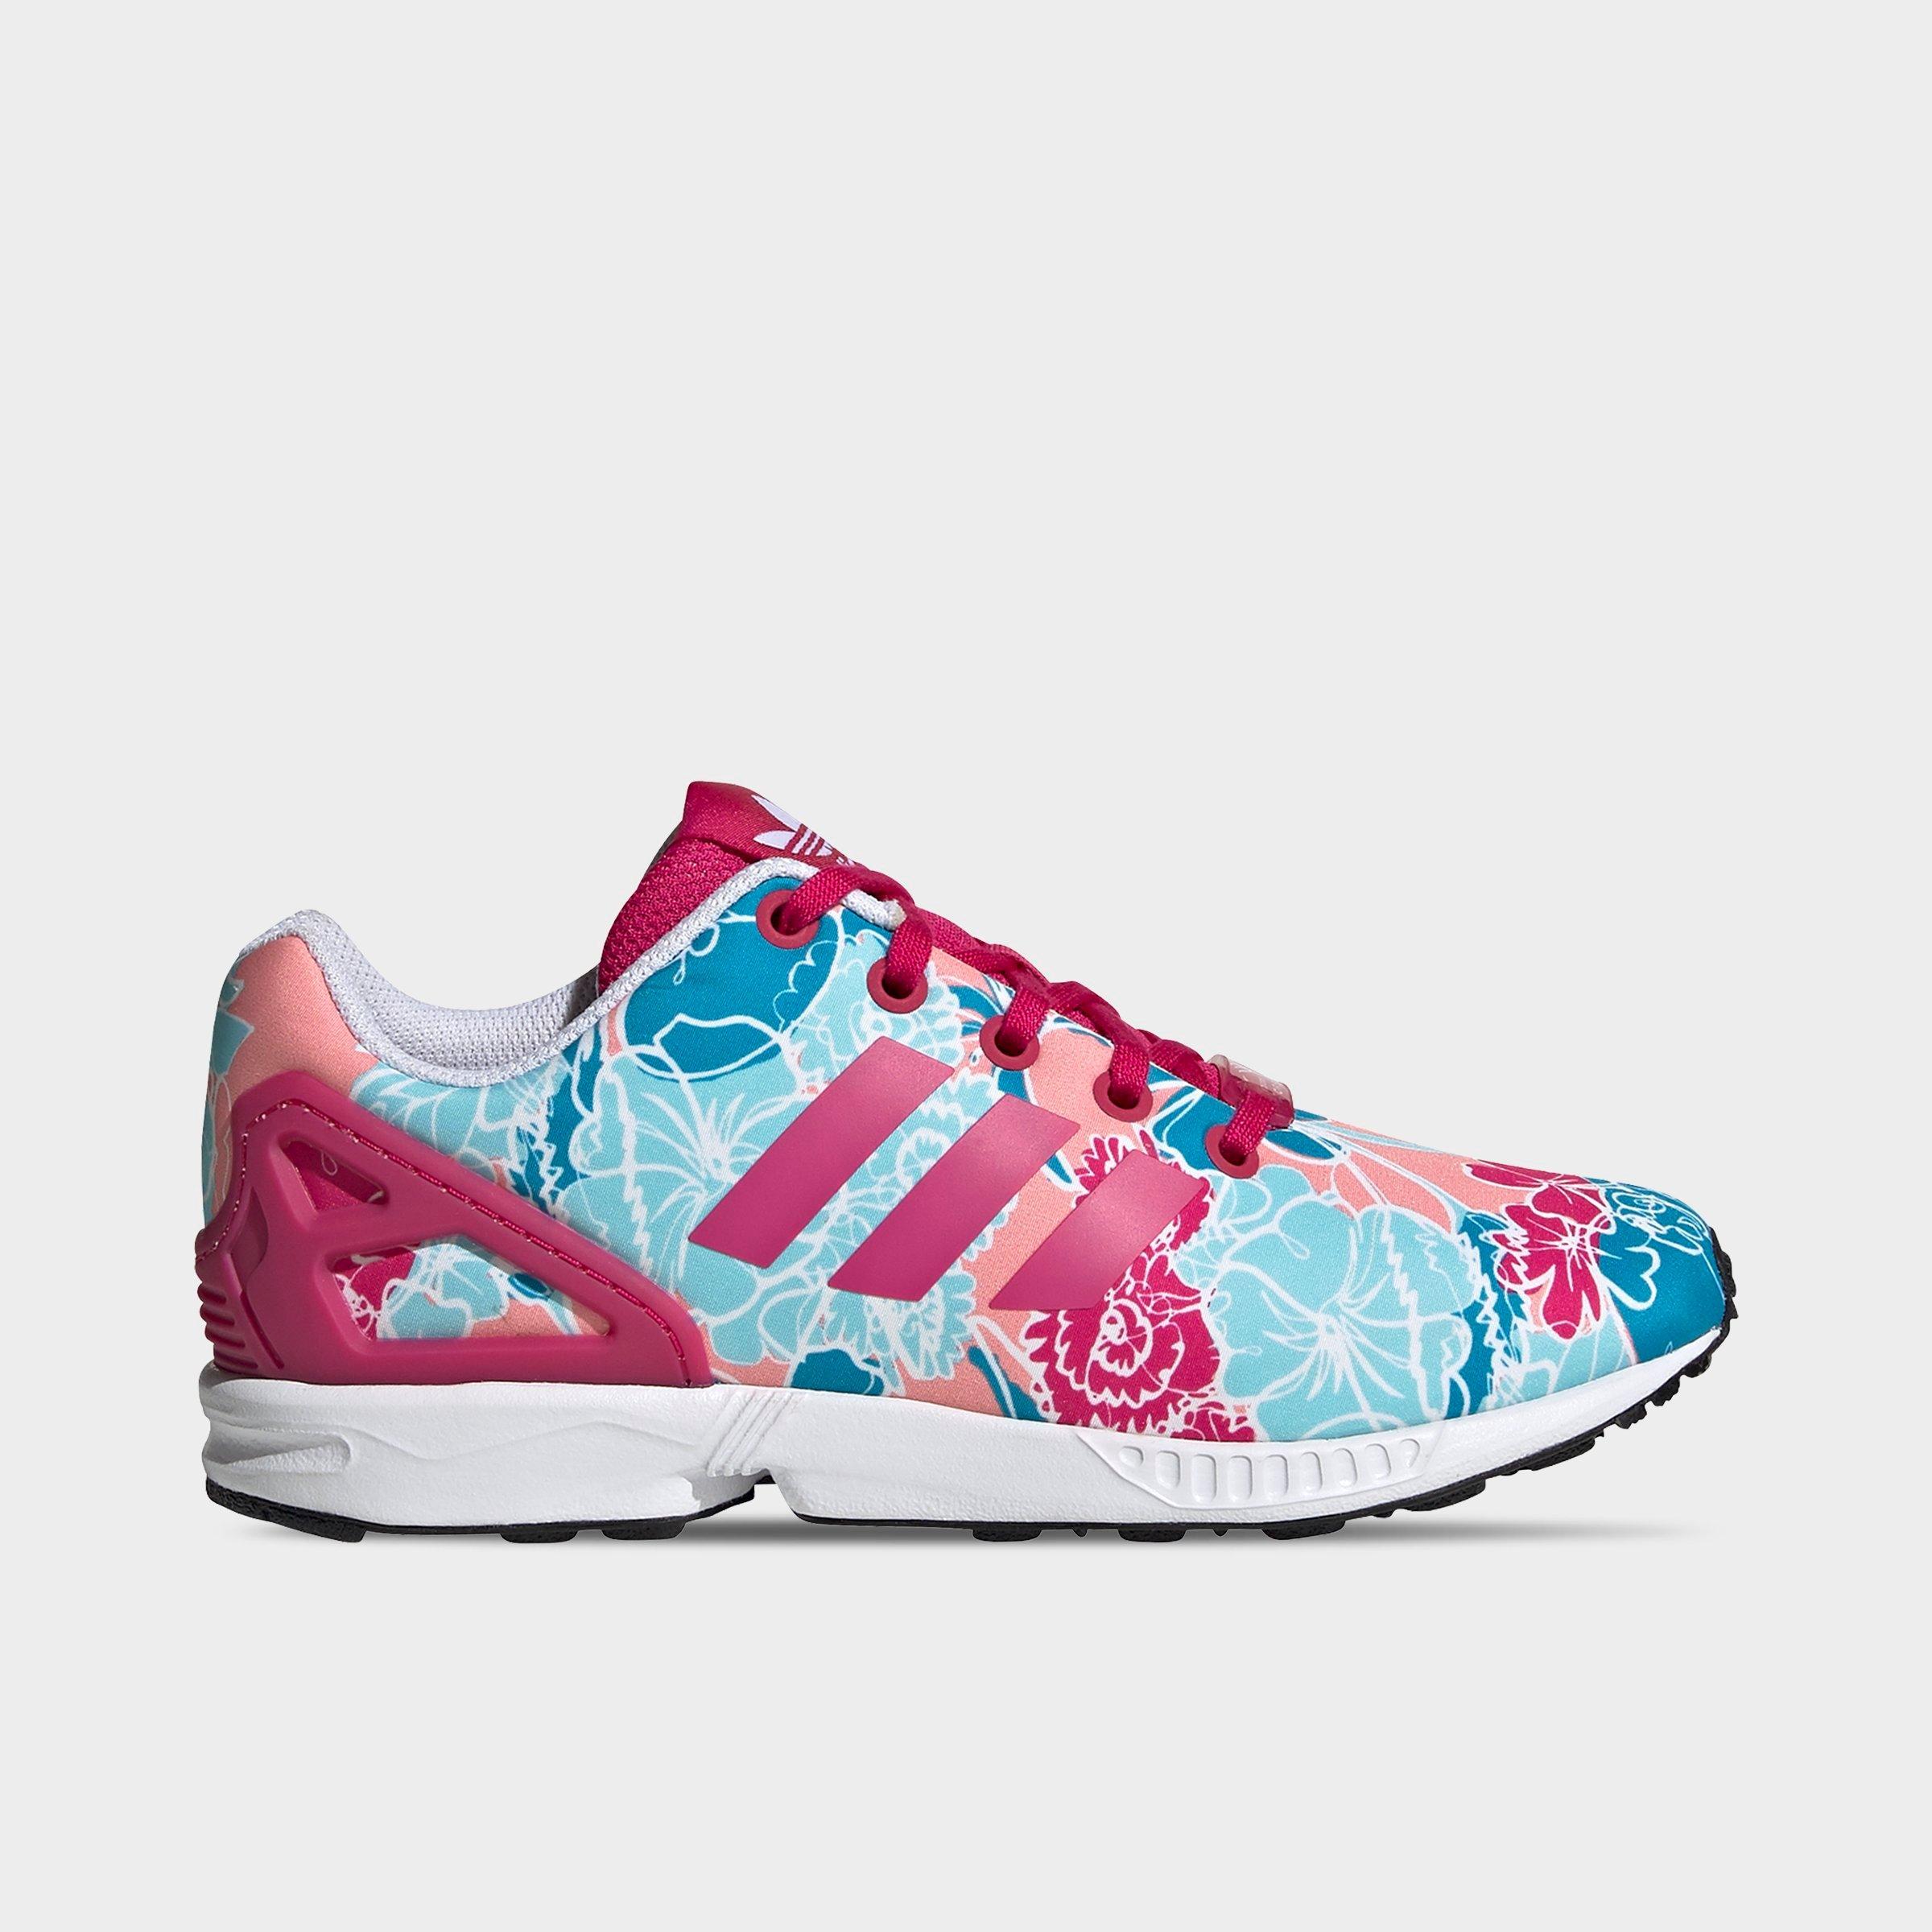 adidas zx flux casual